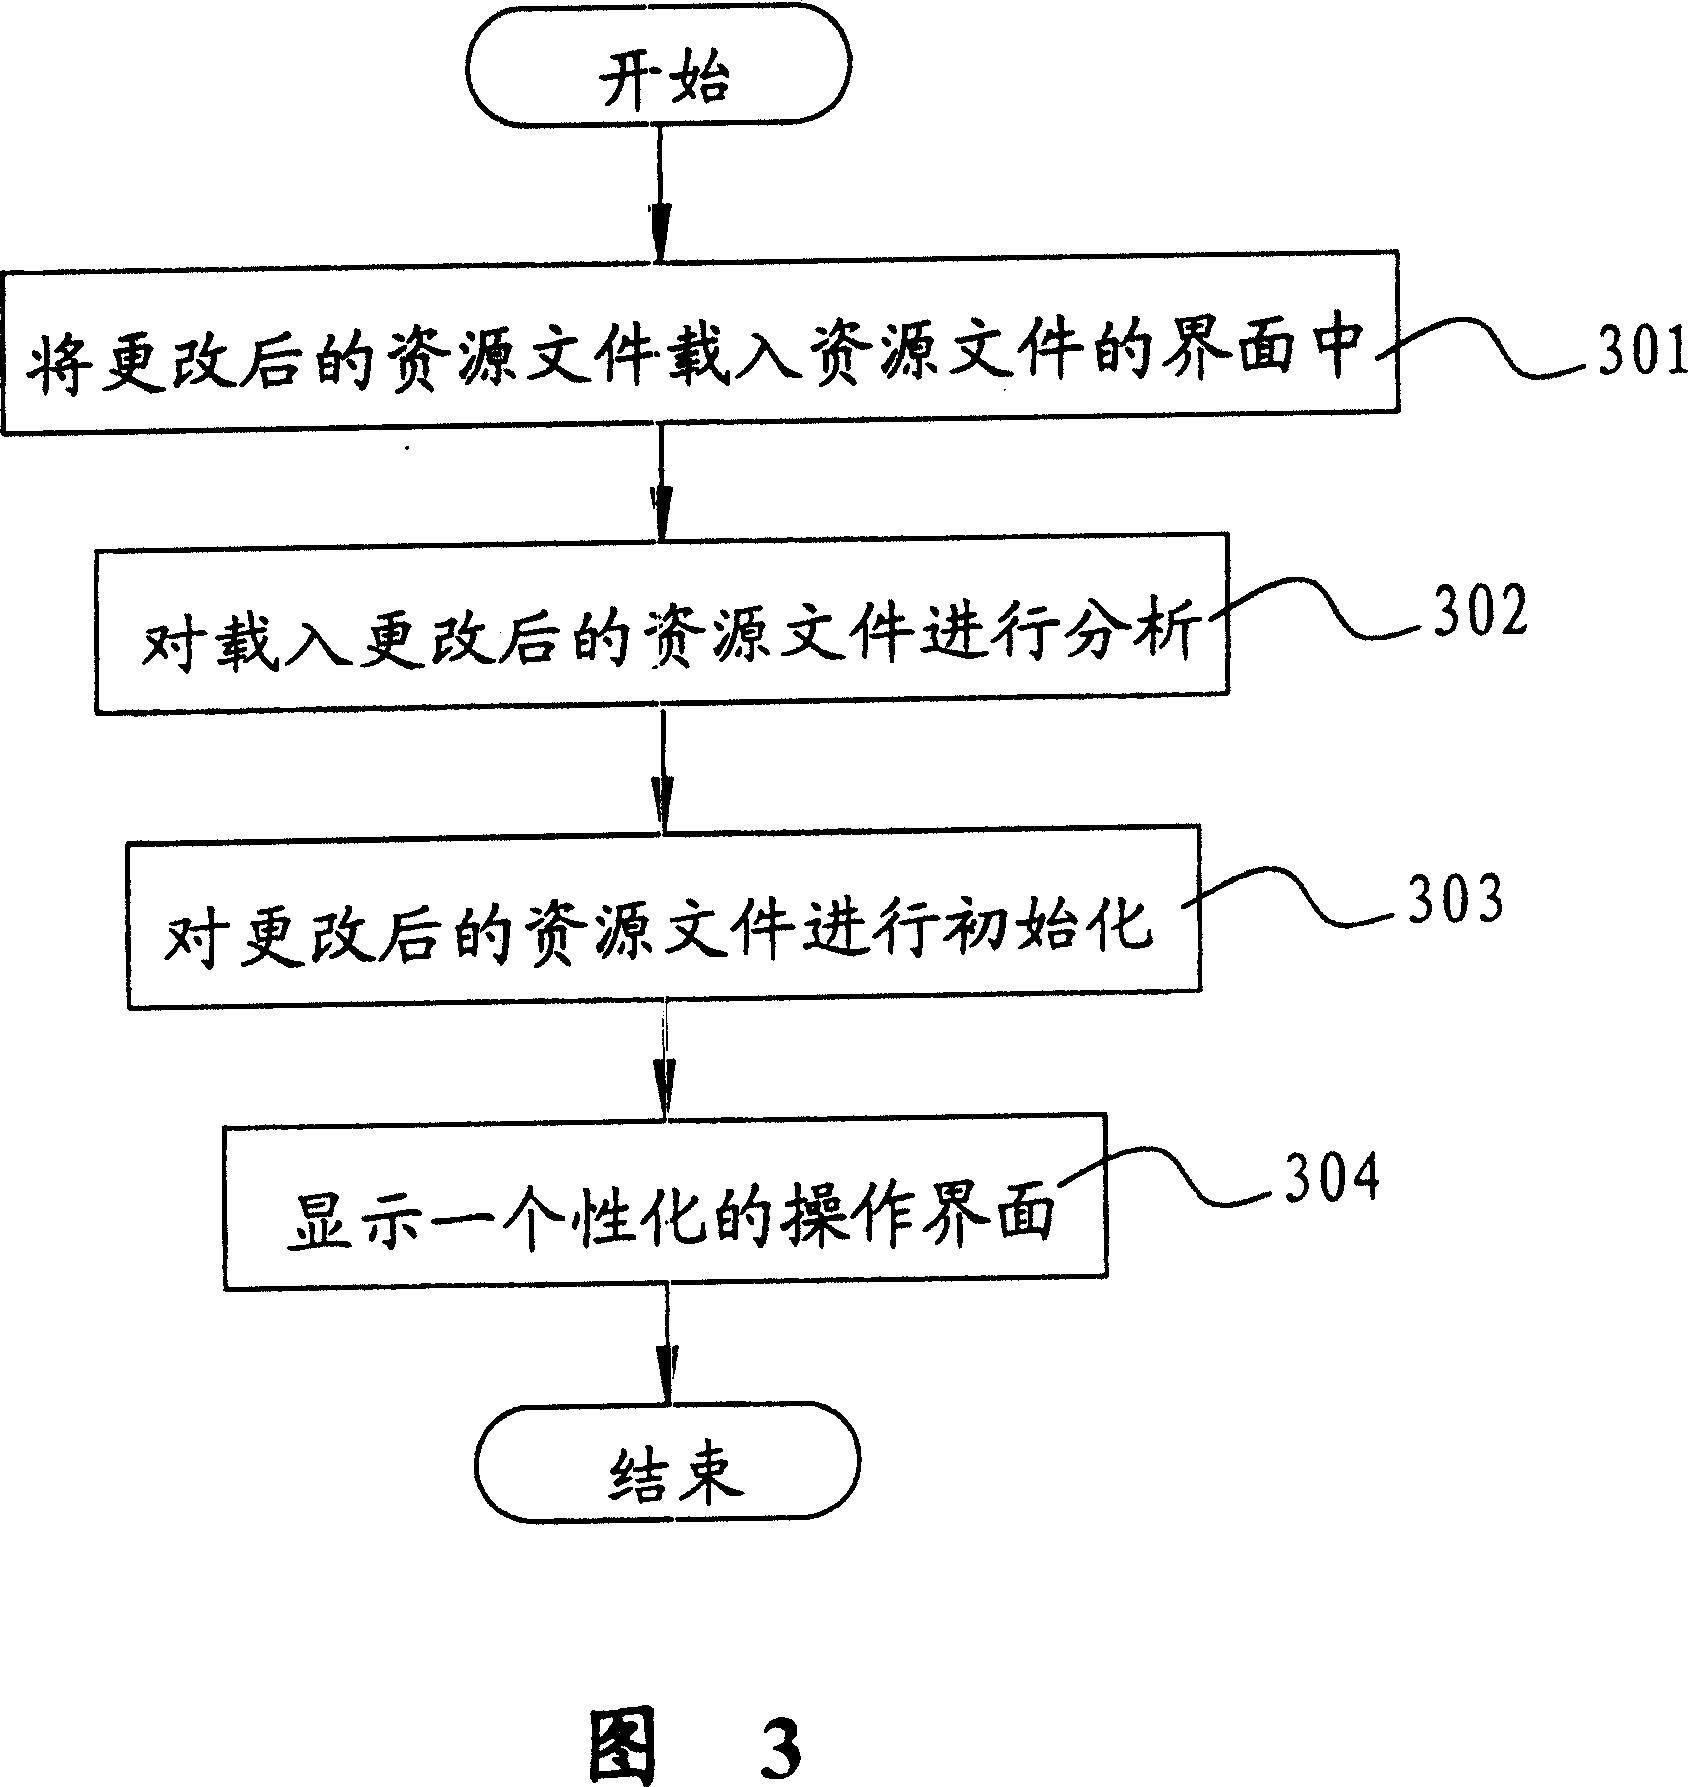 Method of proceeding visible allocation against interface in terminal equipment using personal computer